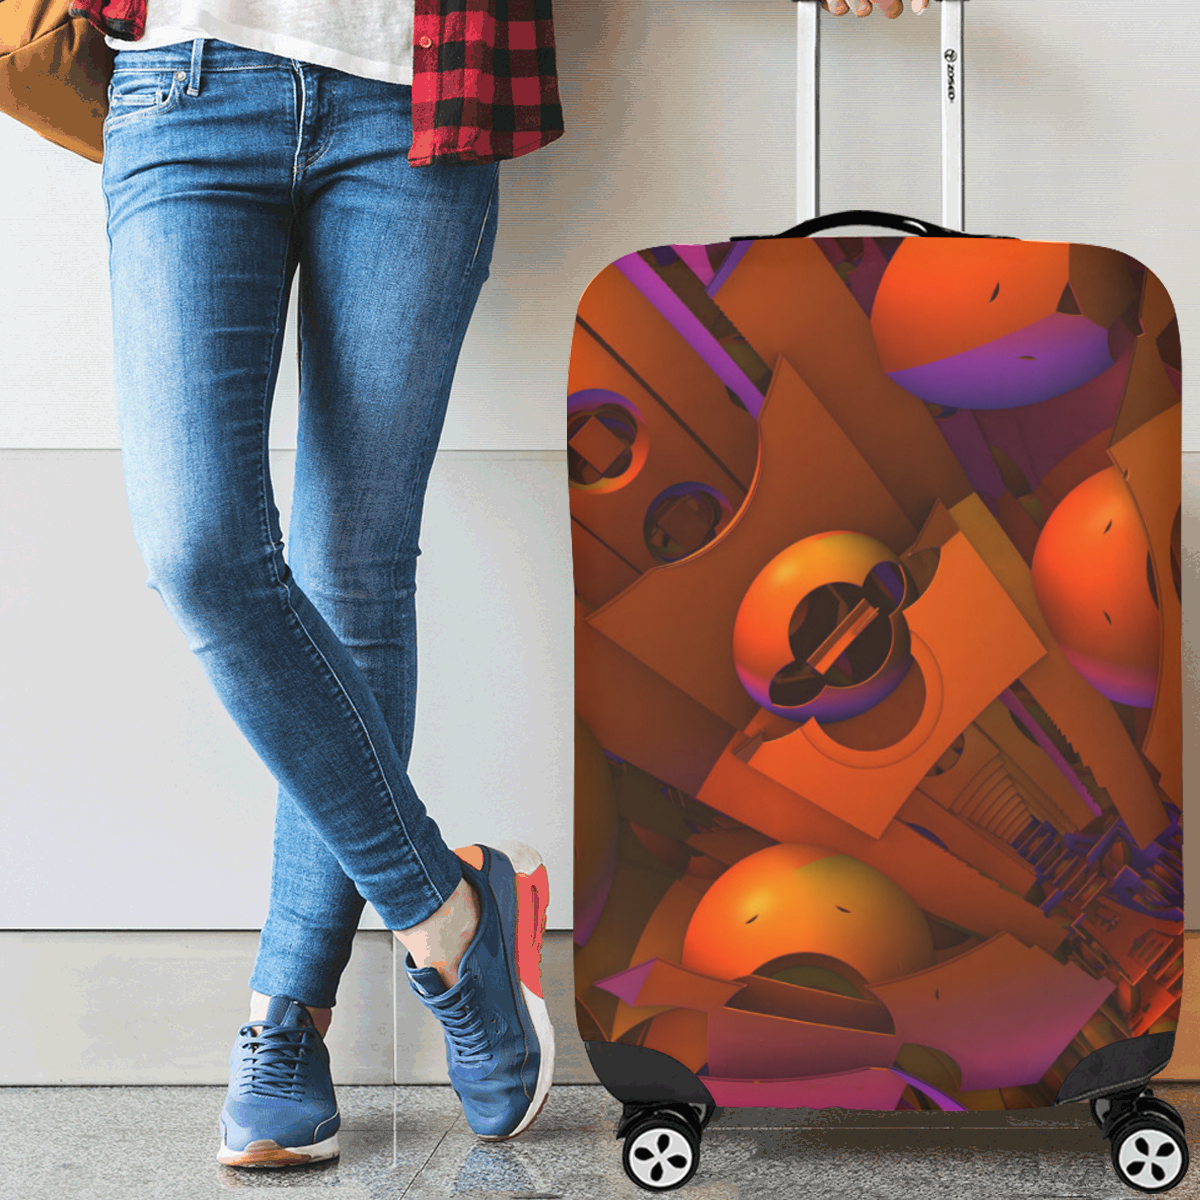 Funhouse Luggage Cover/Large 26"-28"